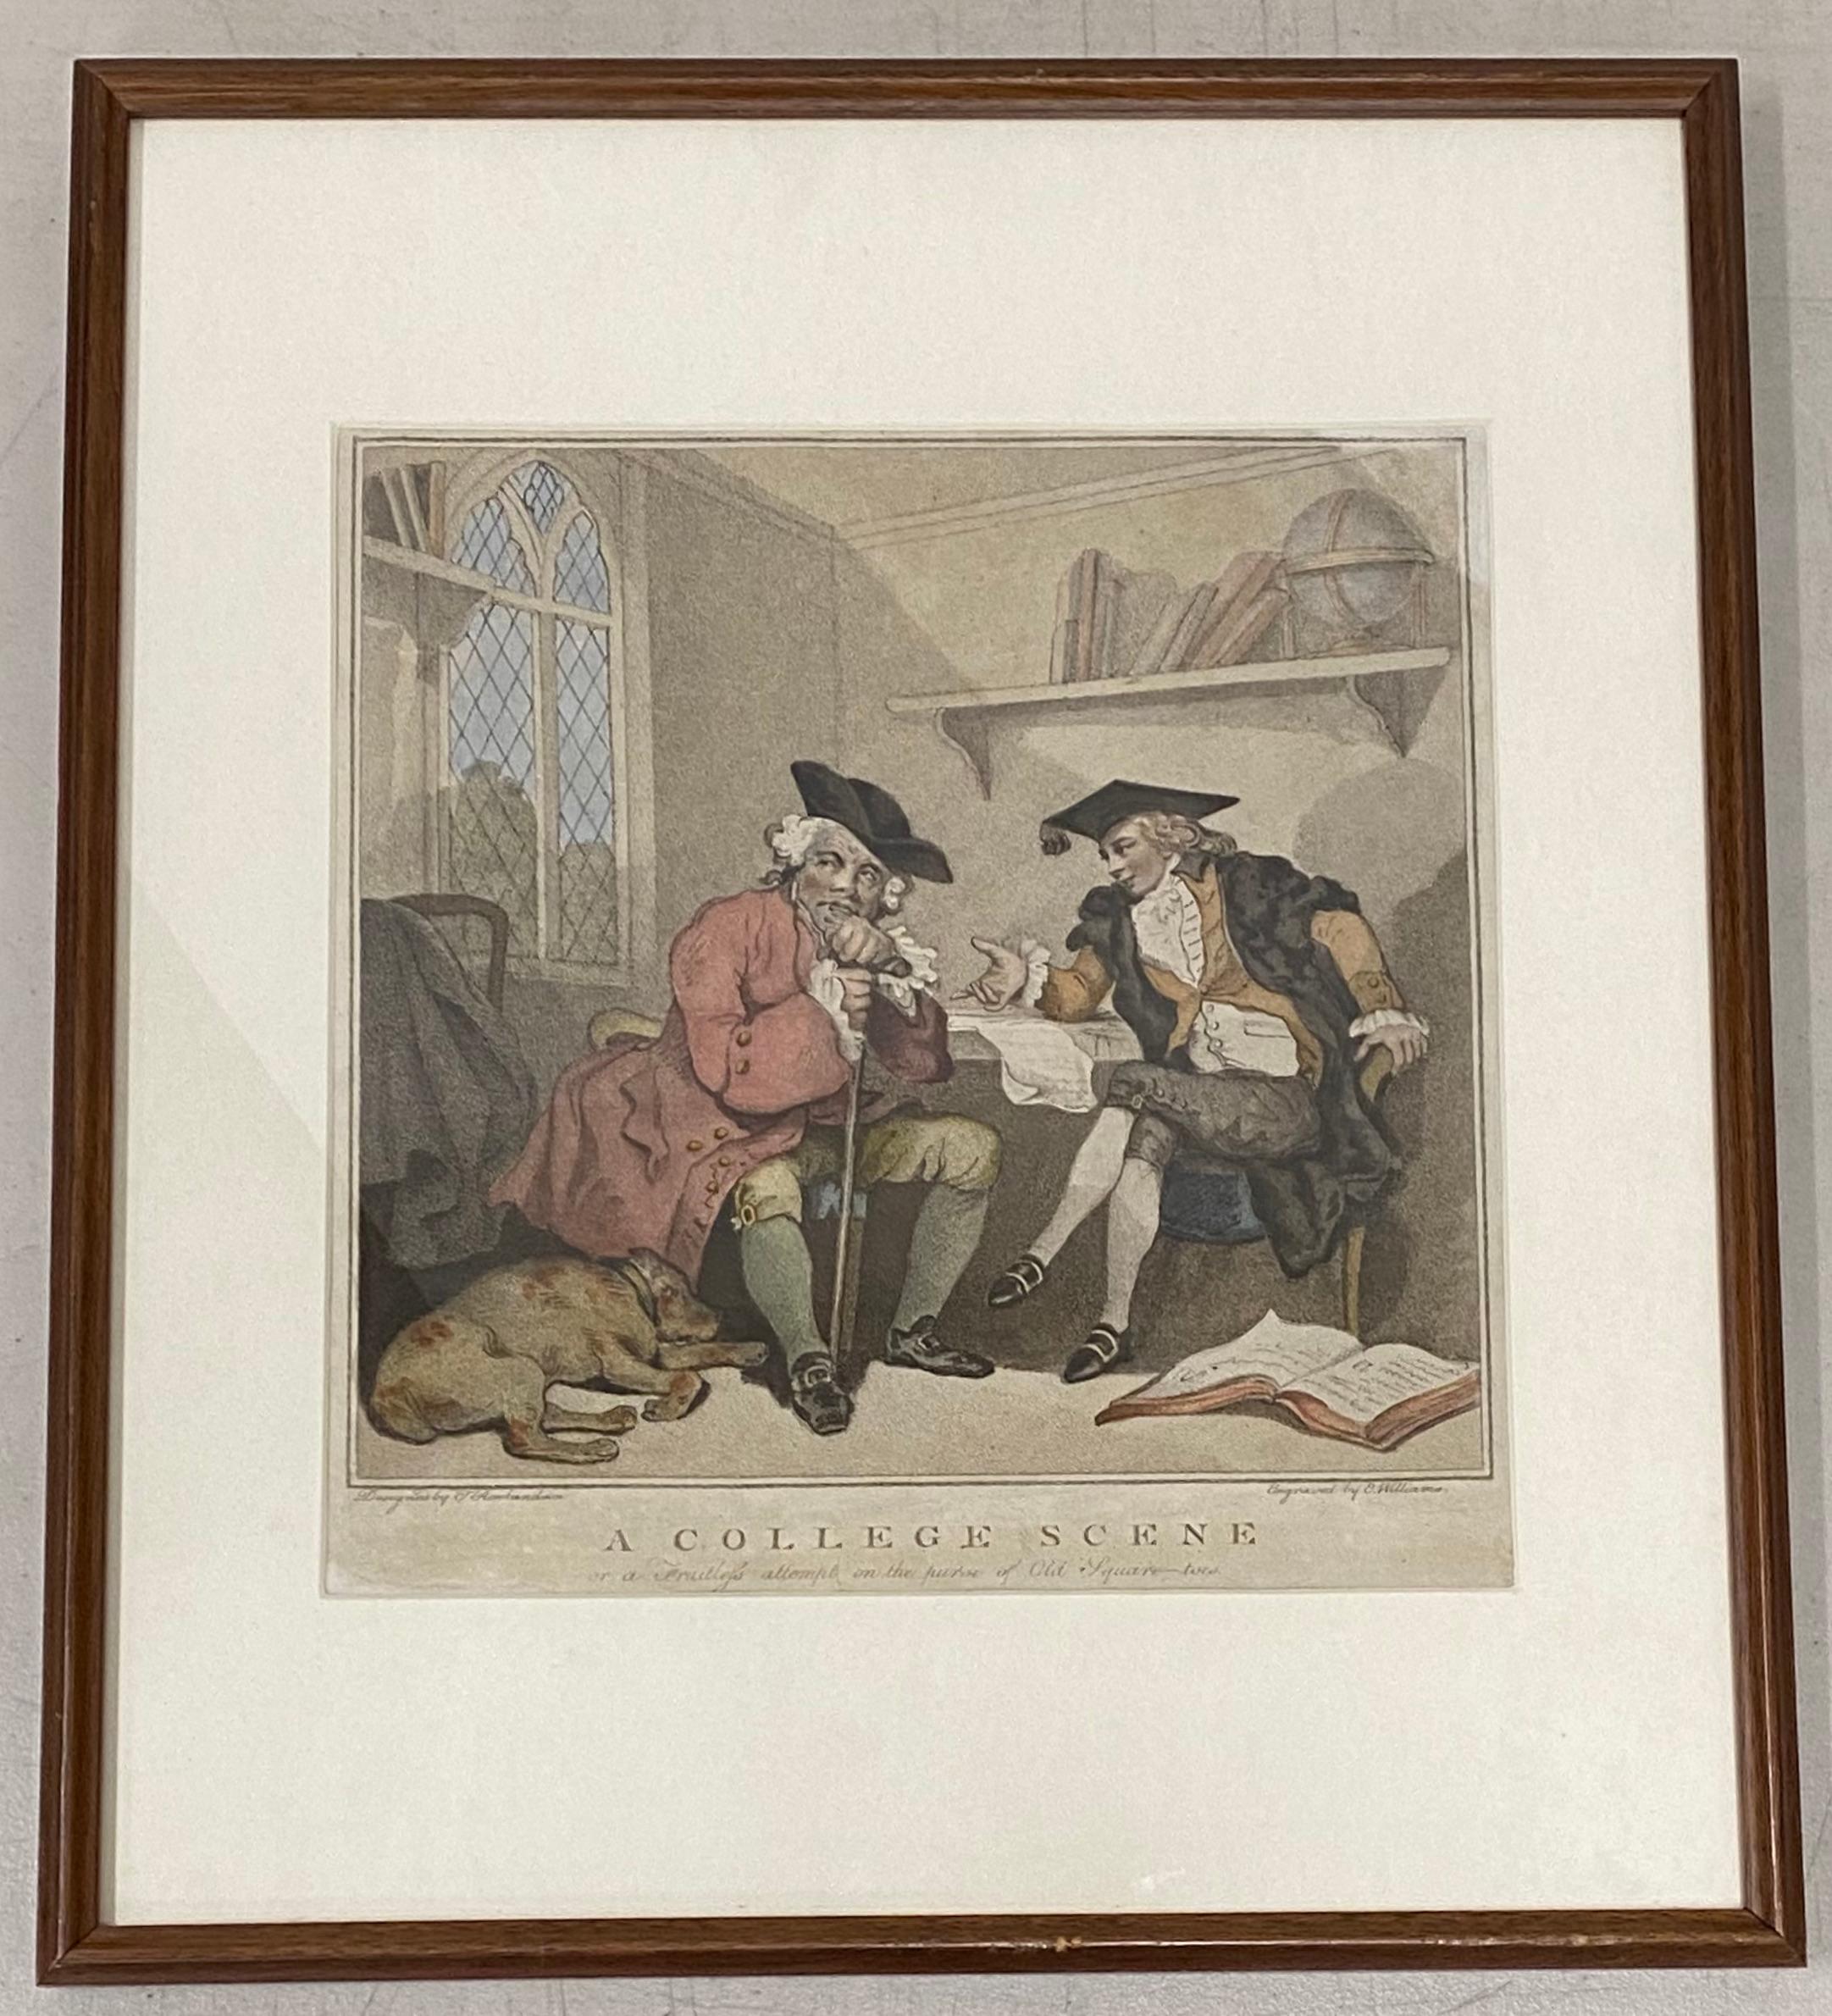 Edward Williams "A College Scene" After Thomas Rowlandson Color Engraving C.1787